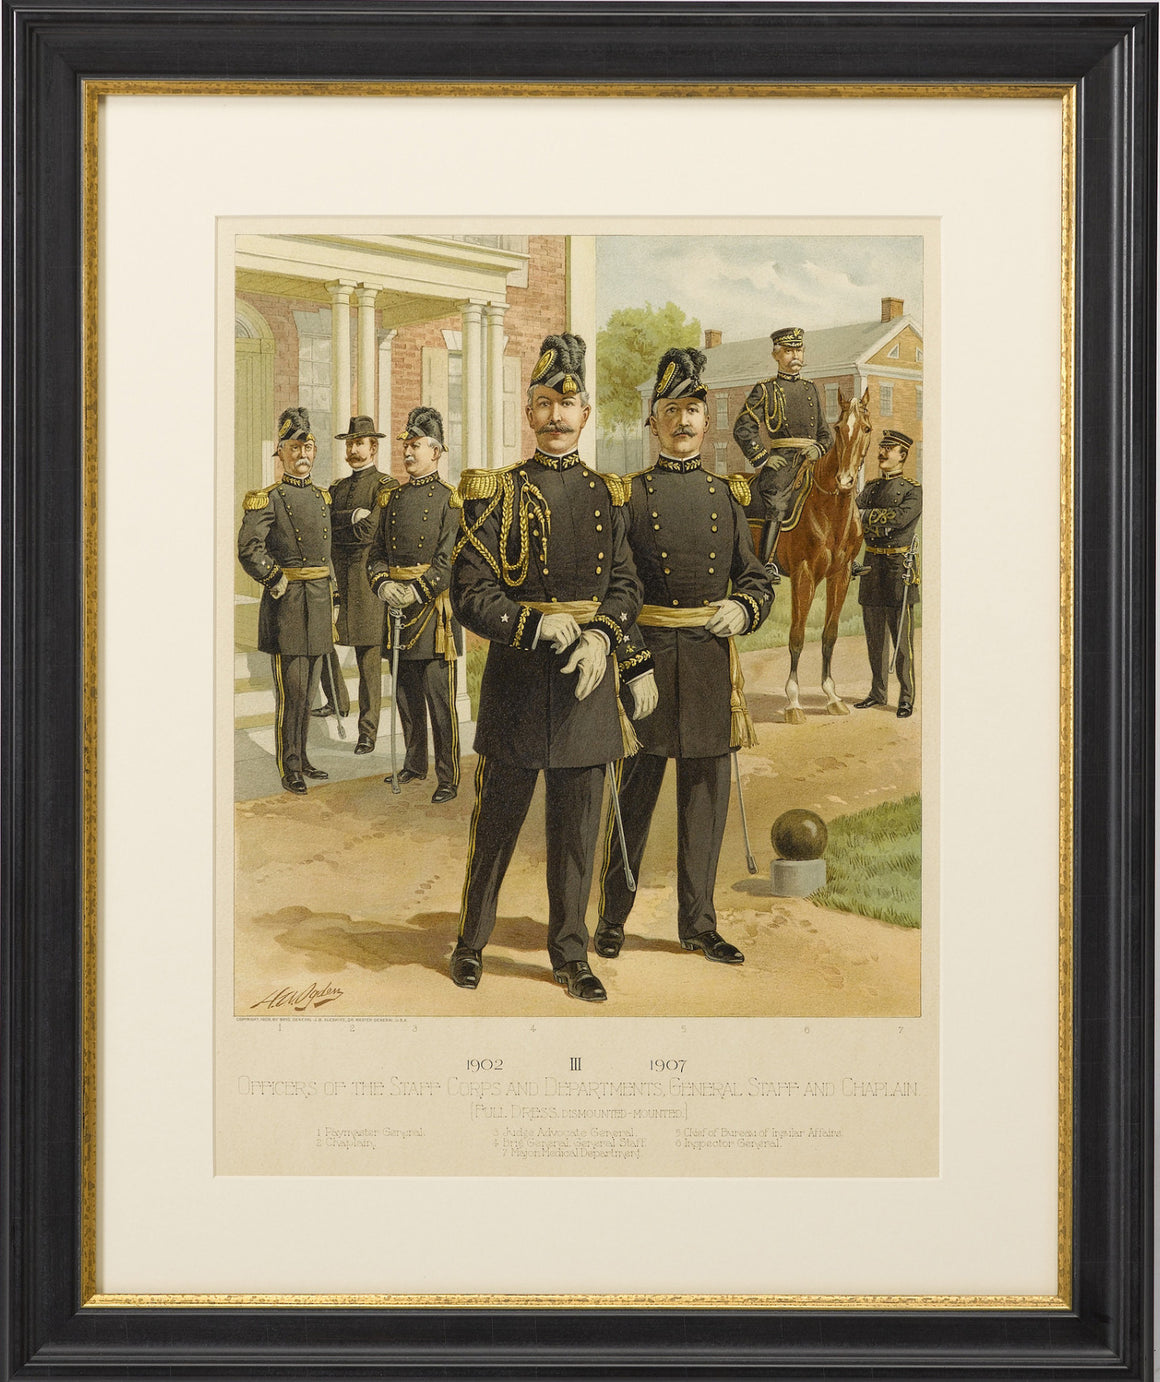 1908 "1902-1907 Officers of the Staff Corps & Departments, General Staff and Chaplain in Full Dress" Chromolithograph by C. Ogden - The Great Republic